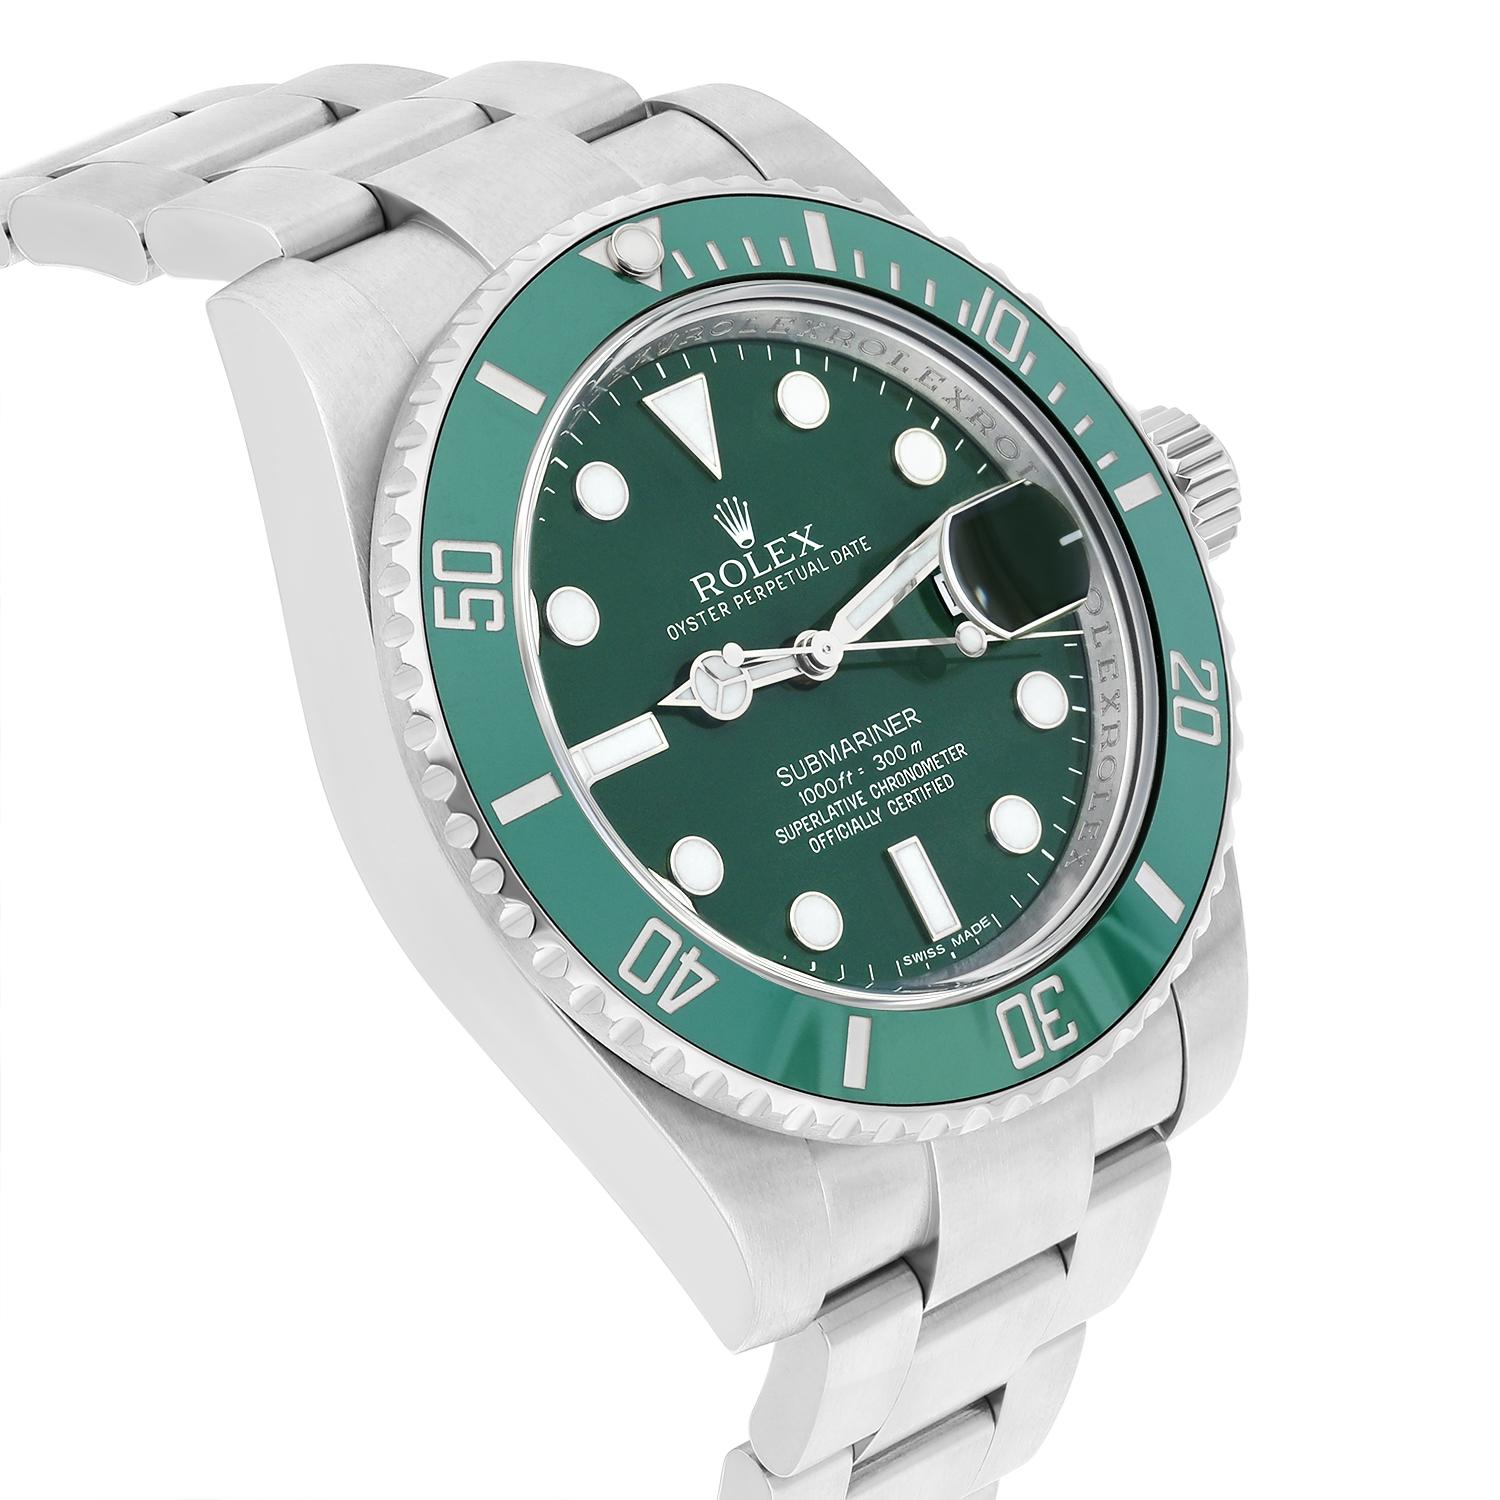 Rolex Submariner 40mm 116610LV HULK Steel Green Ceramic Bezel-Green Dial  In Excellent Condition For Sale In New York, NY